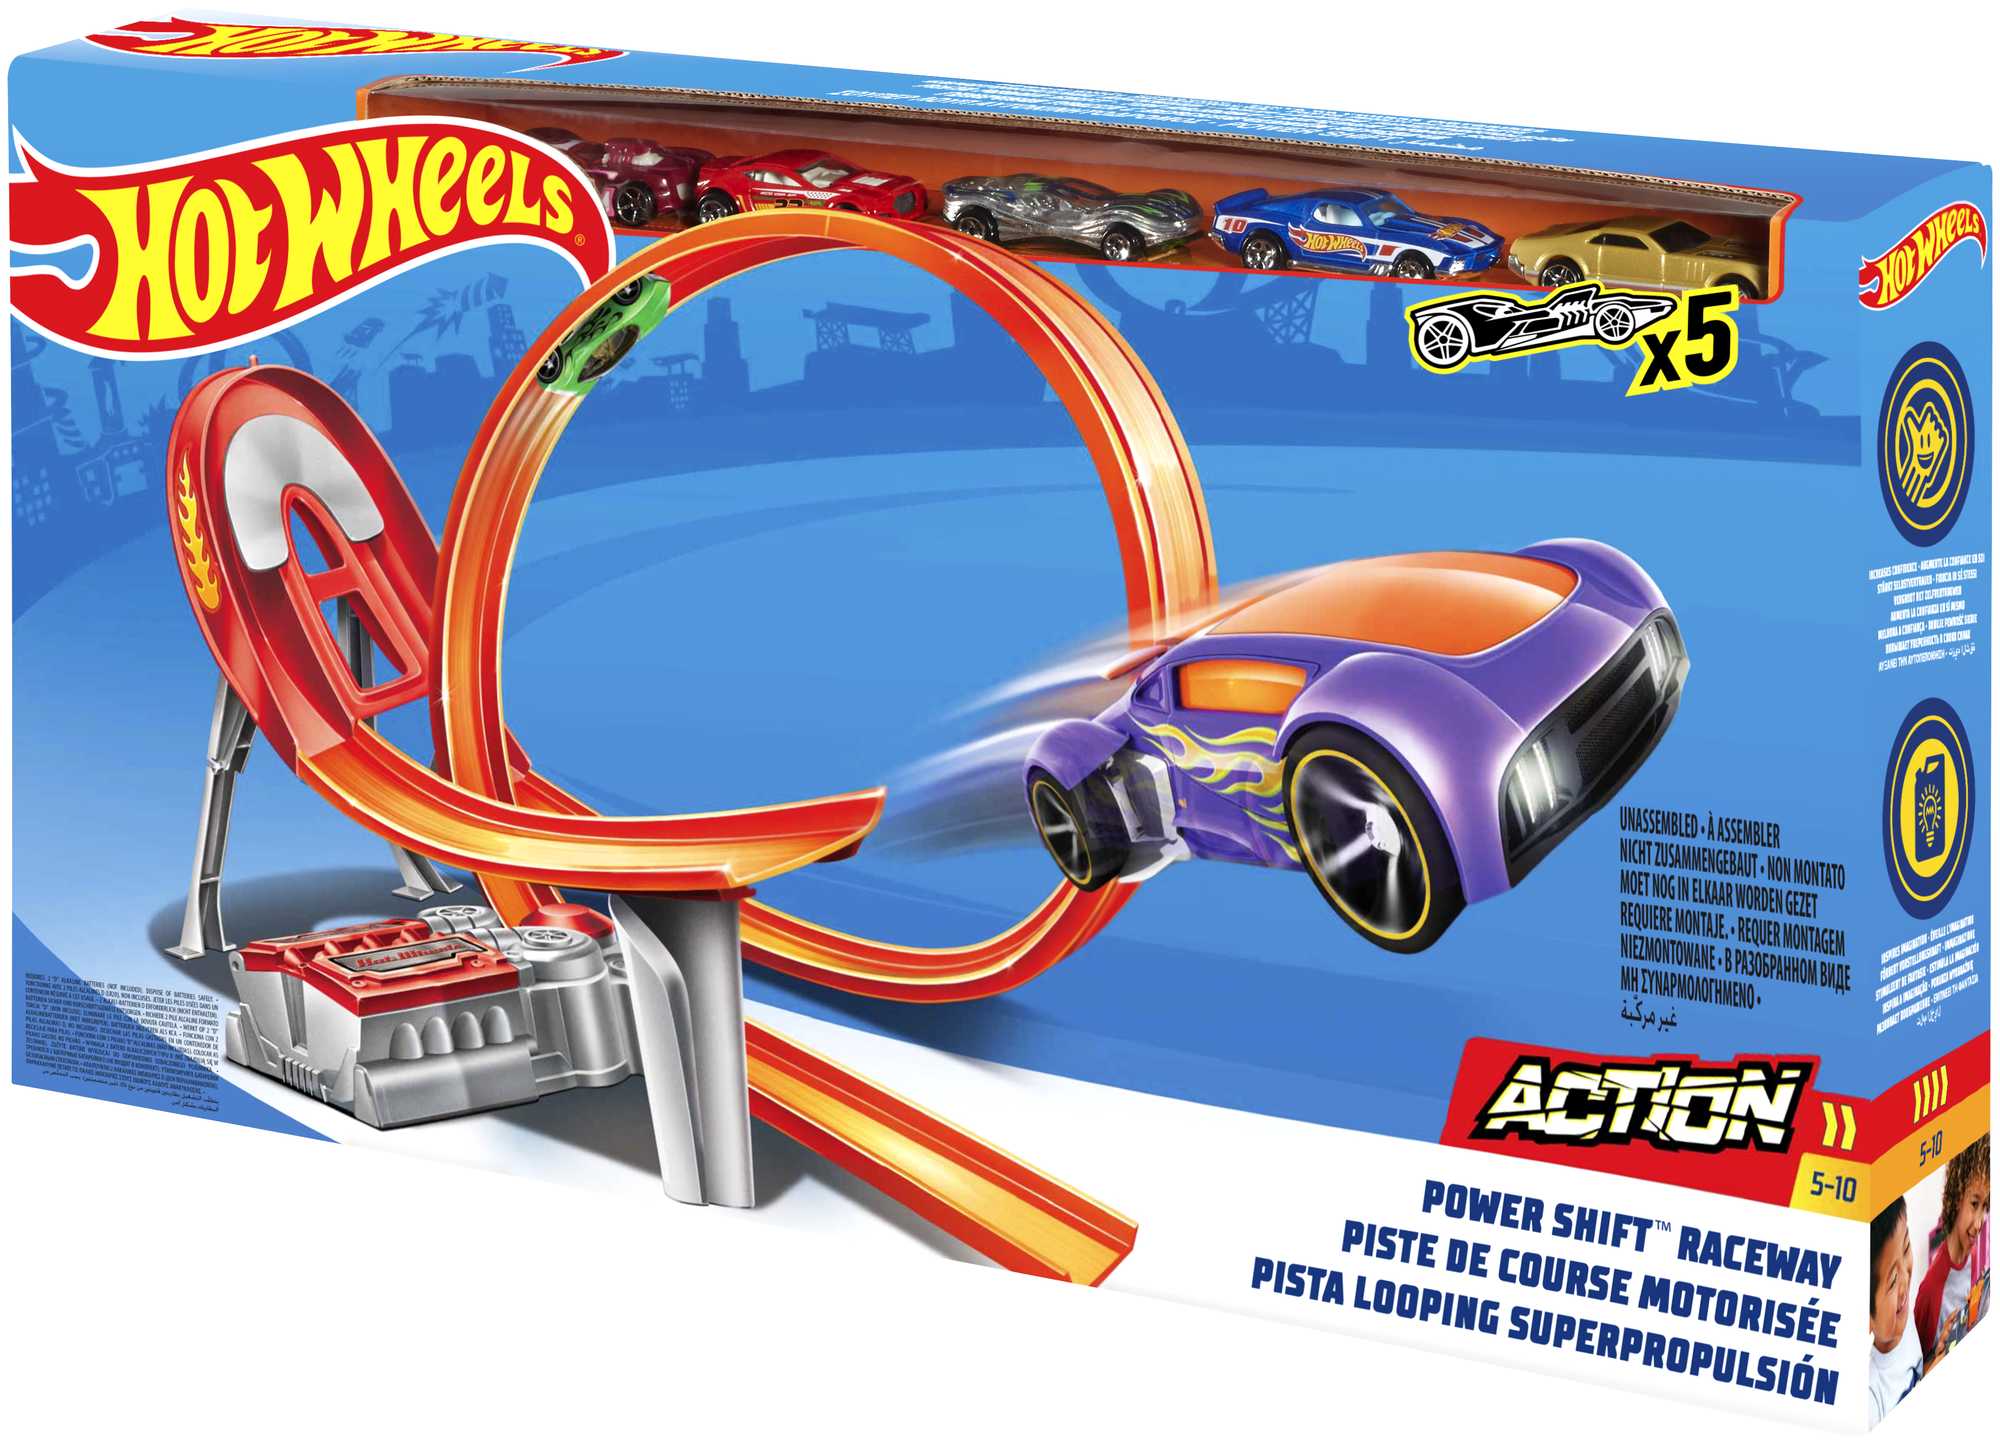 Hot Wheels Action Power Shift Motorized Raceway Track Set, Includes 5 Cars in 1:64 Scale - image 7 of 7